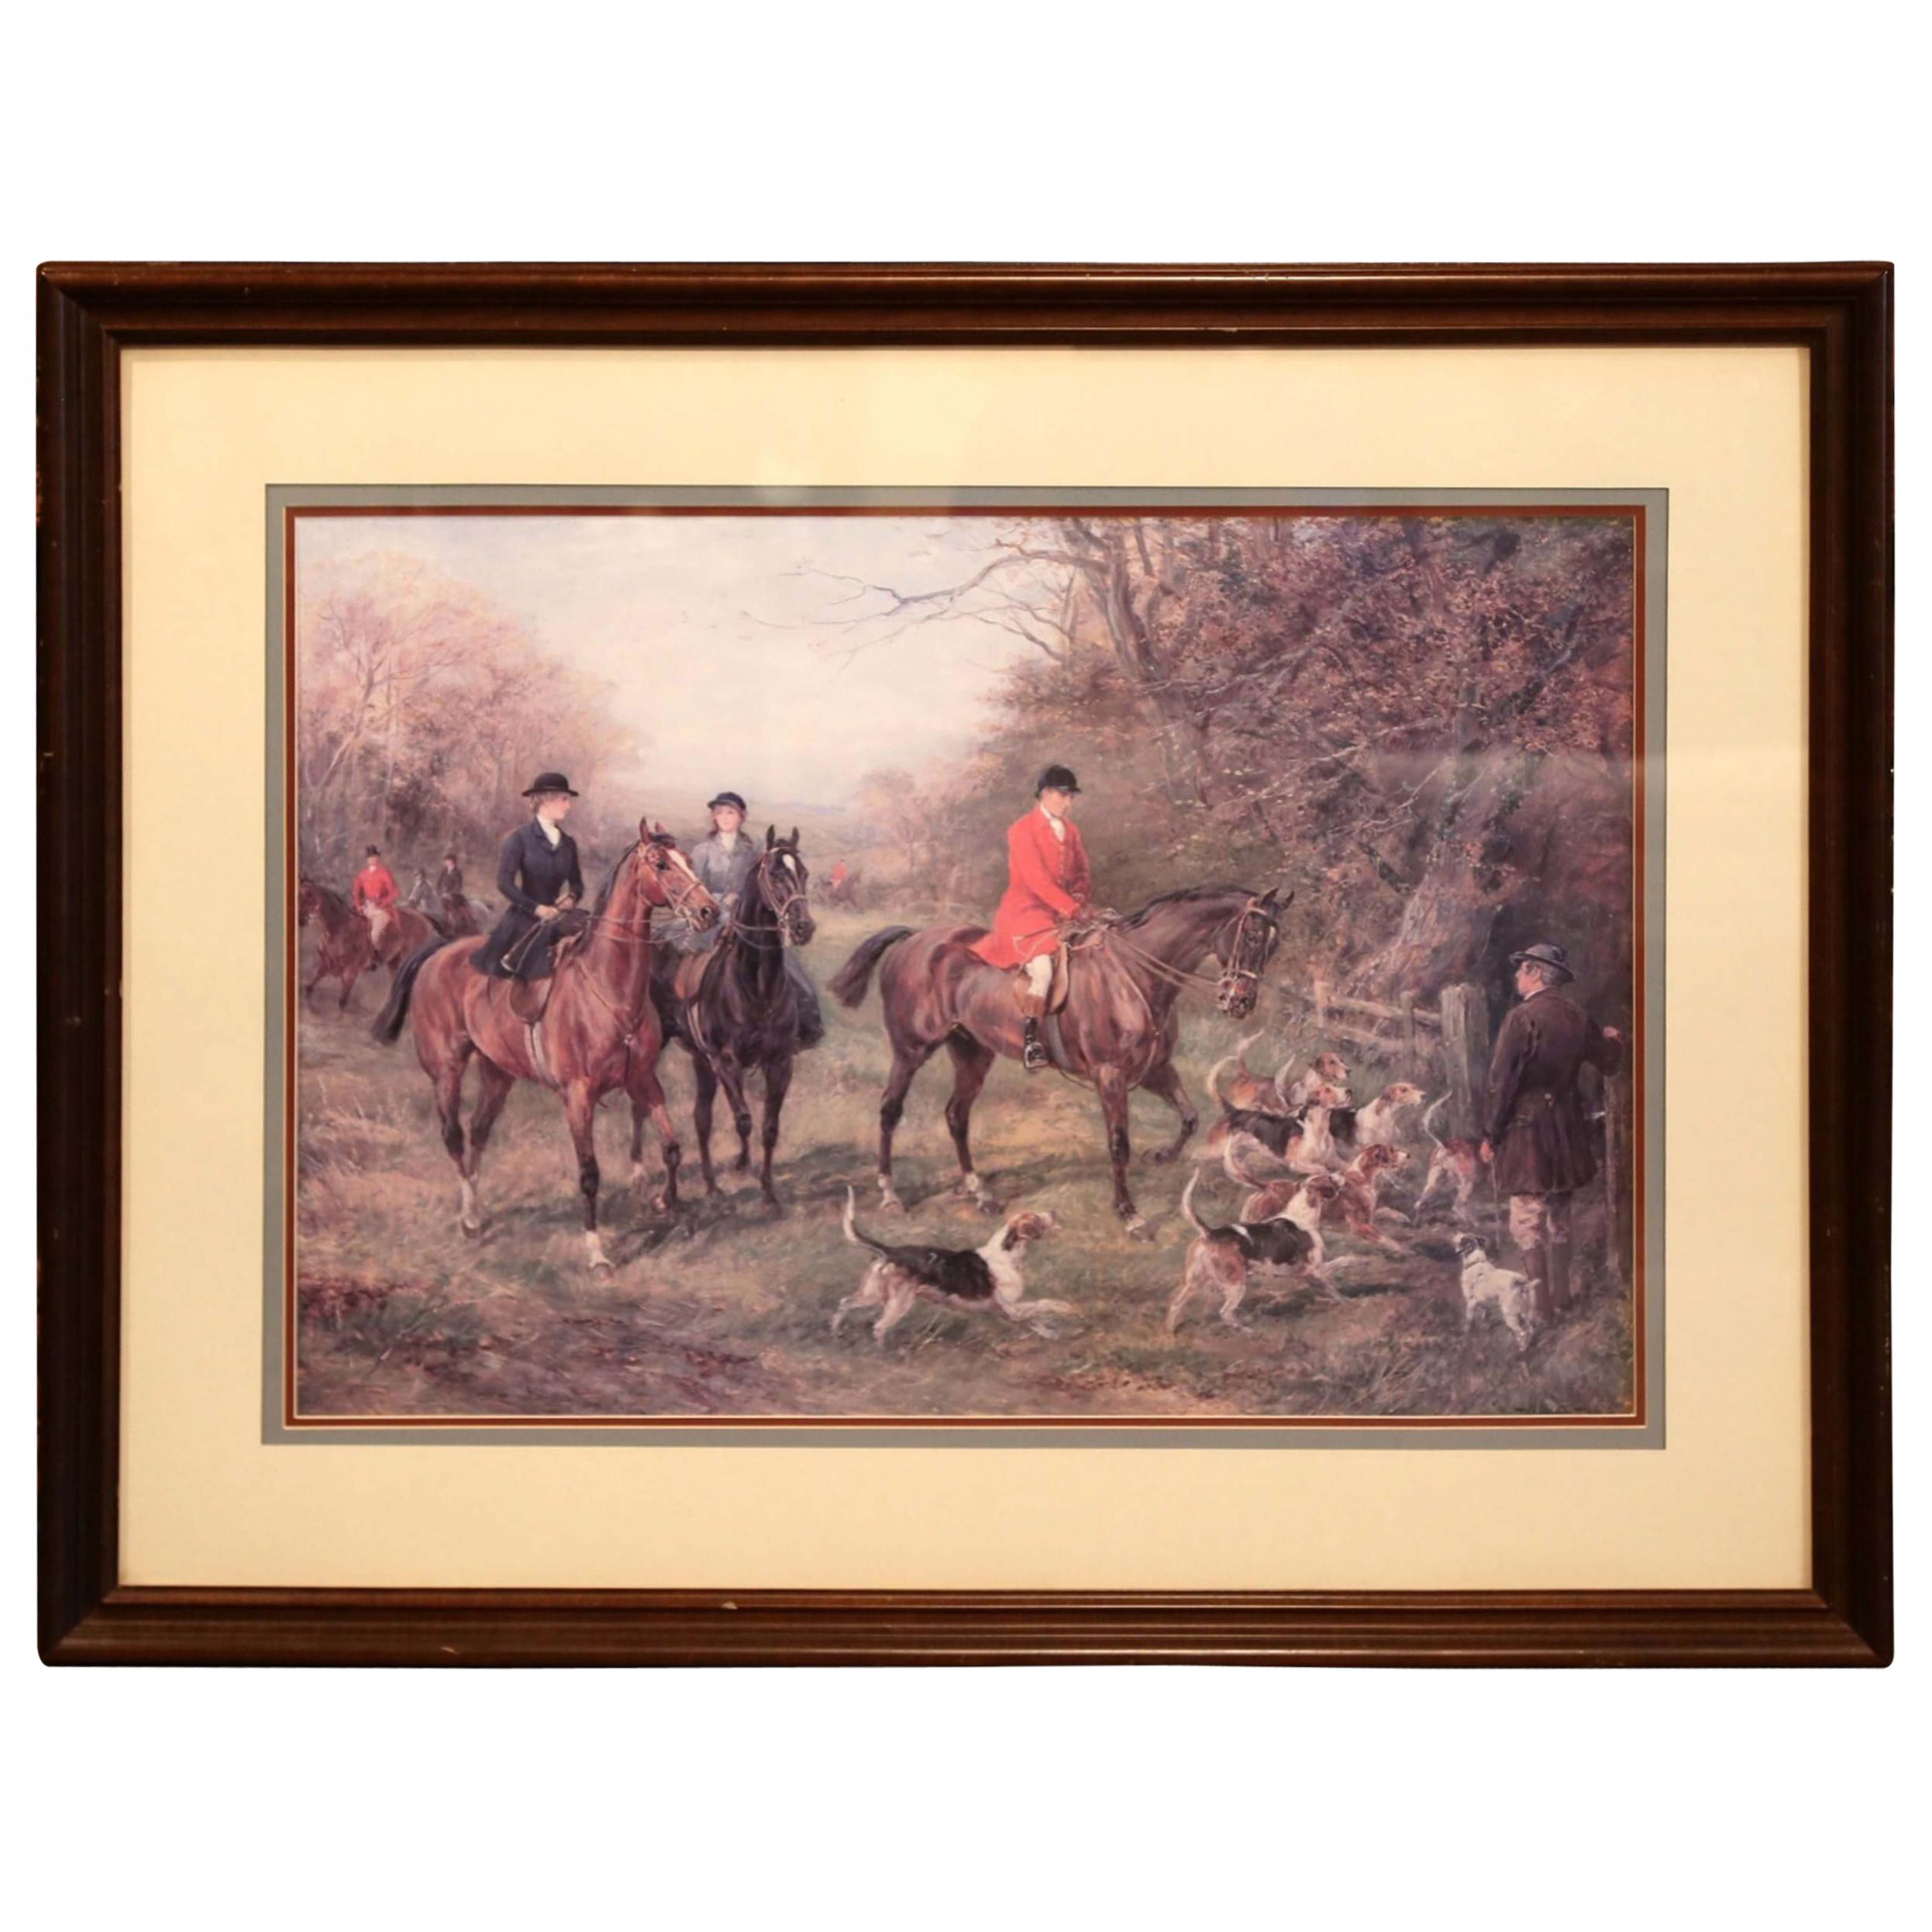 English Framed Print "Going to Cover" with Hunting and Dogs after Heywood Hardy